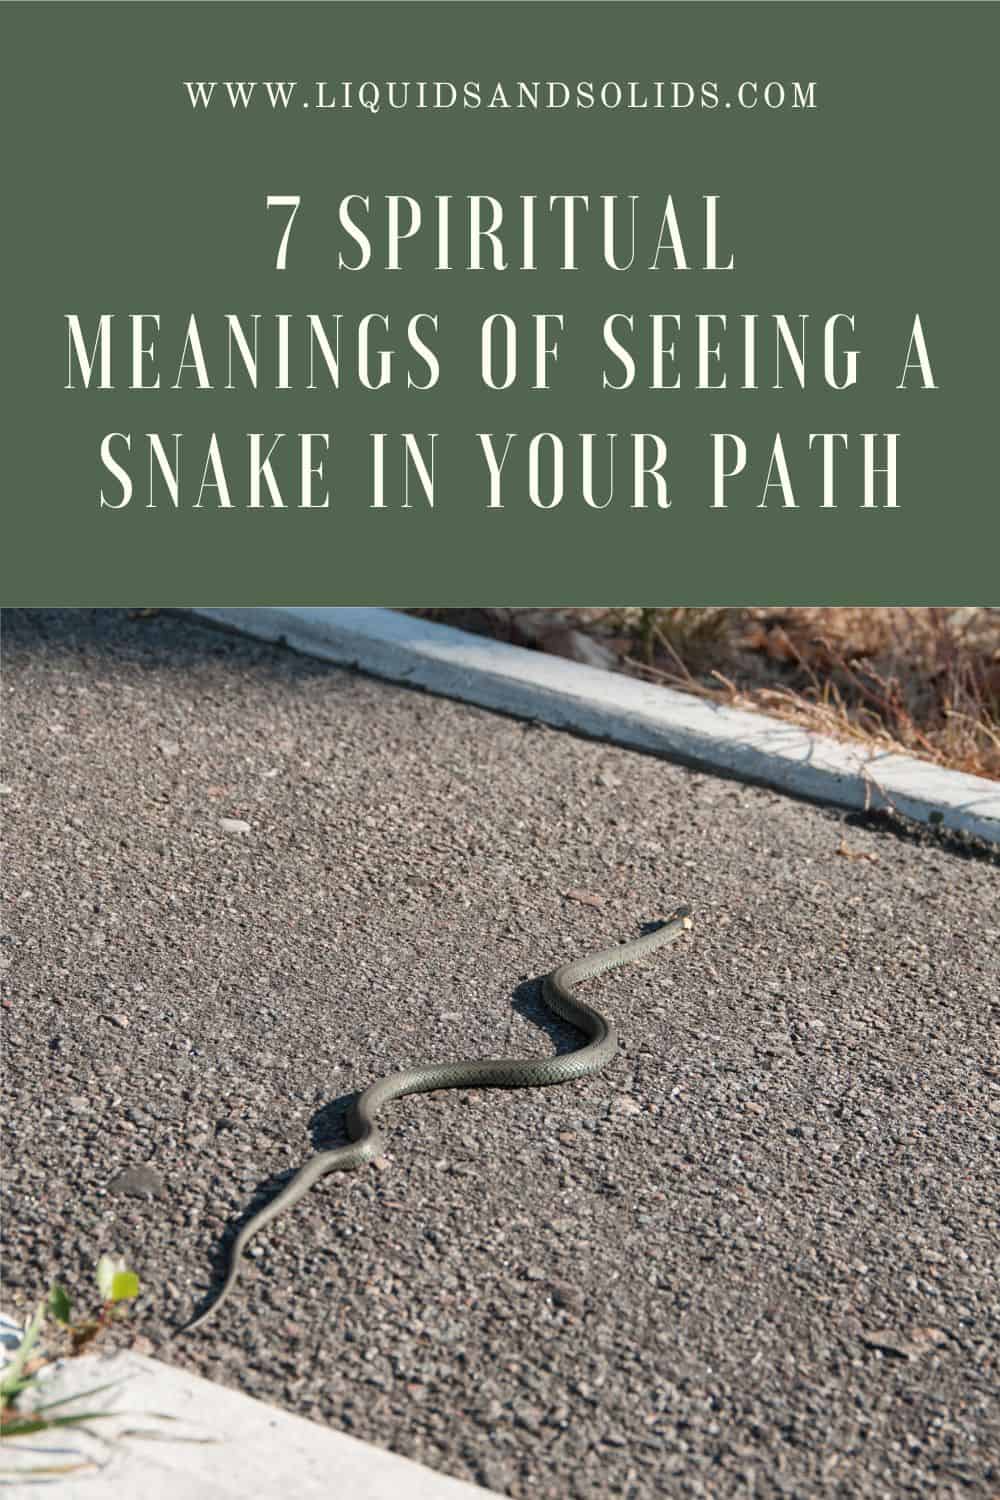 The Meaning Of Seeing A Snake In Your Path